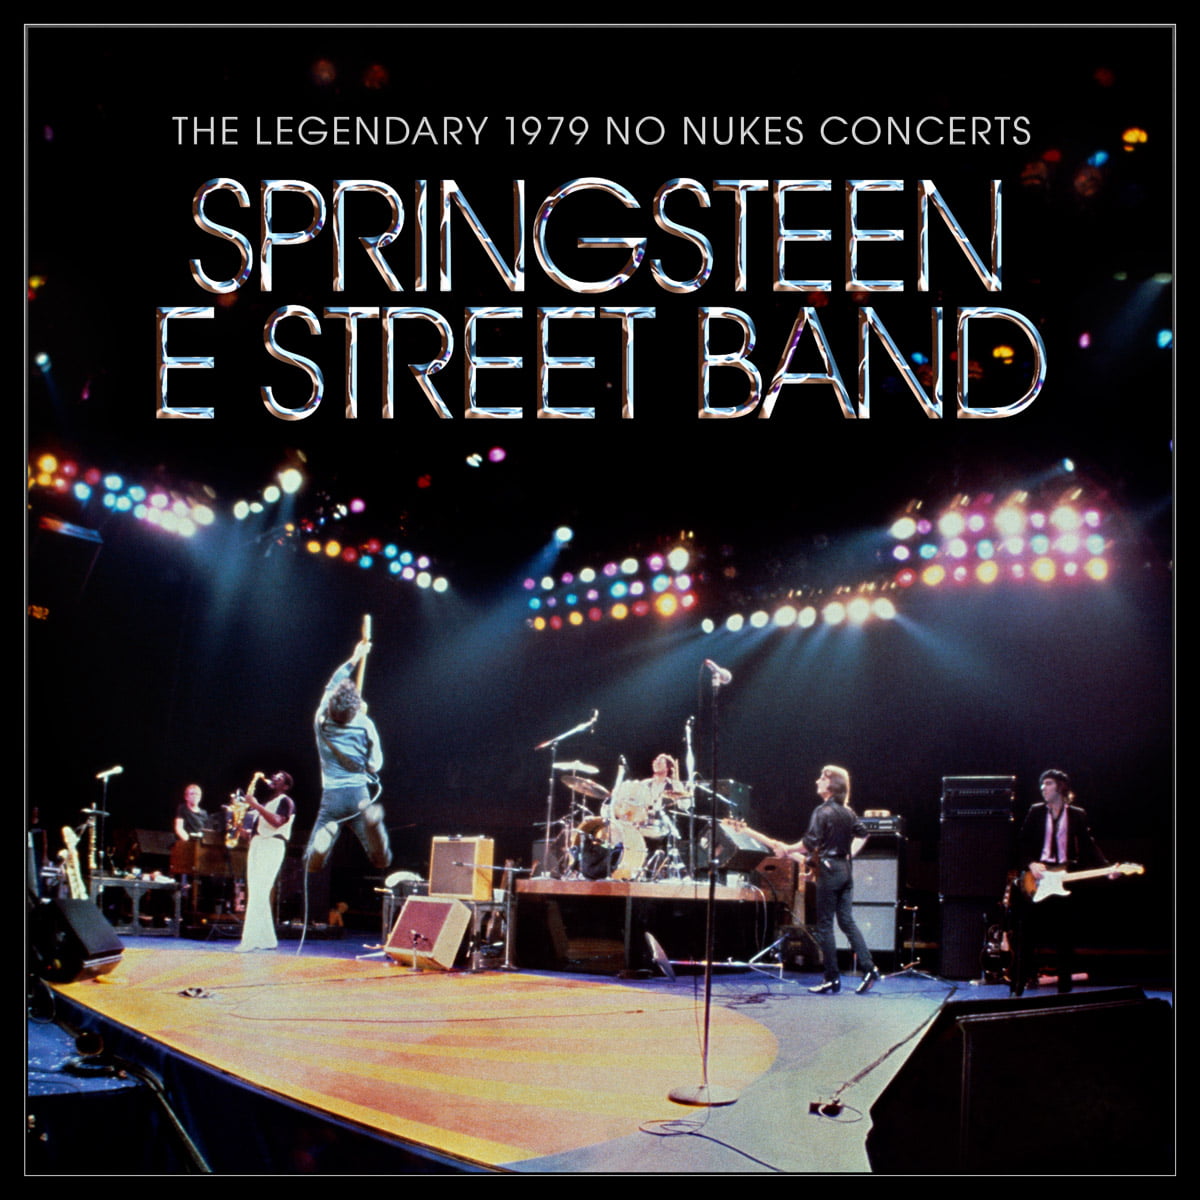 Bruce Springsteen The Legendary 1979 No Nukes Concerts album front cover